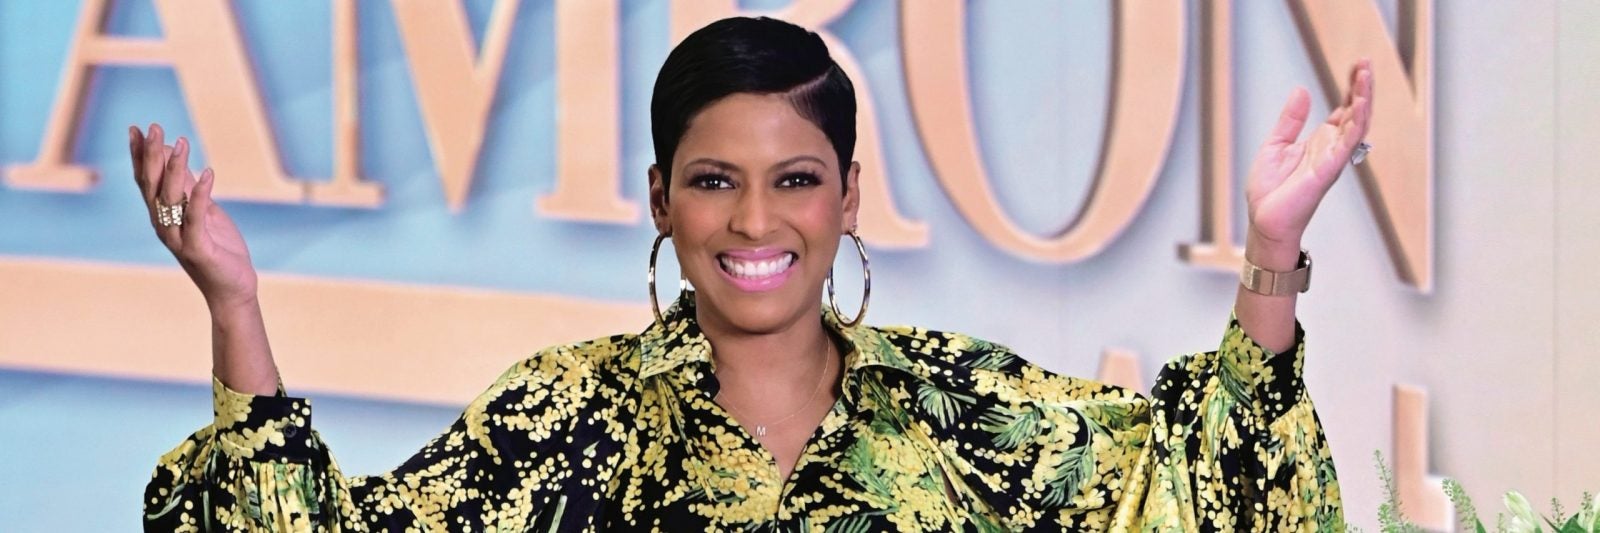 12 Black Women Talk Show Hosts To Tune Into Right Now